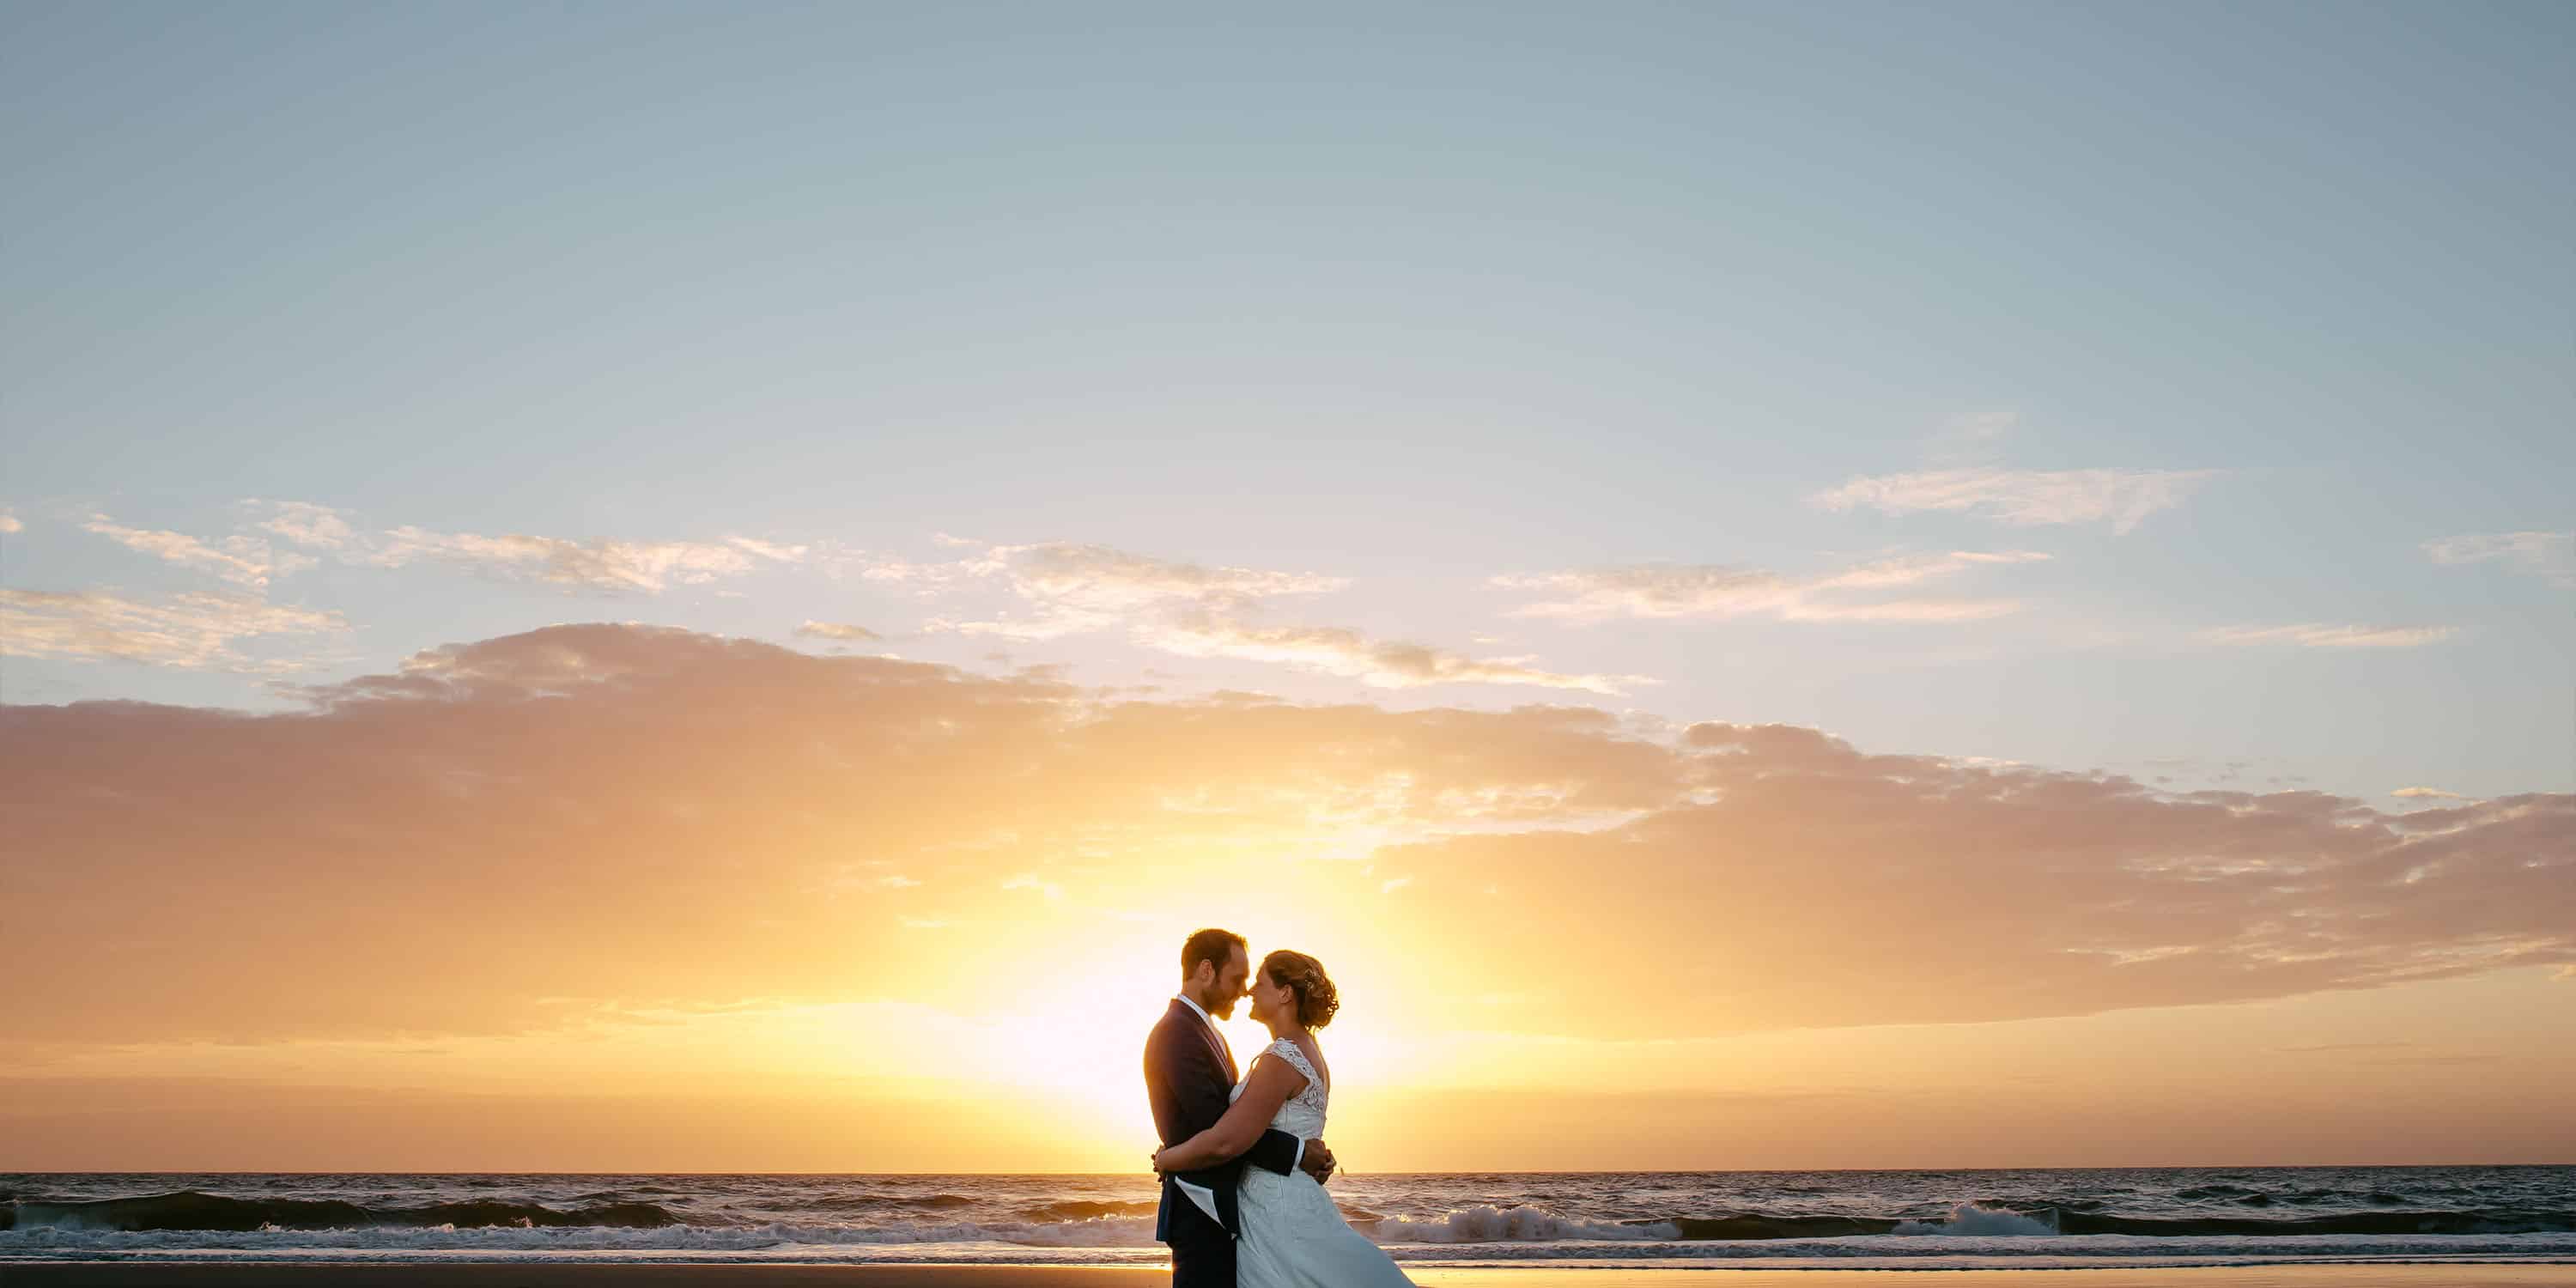 A cheap wedding couple standing on the beach at sunset.